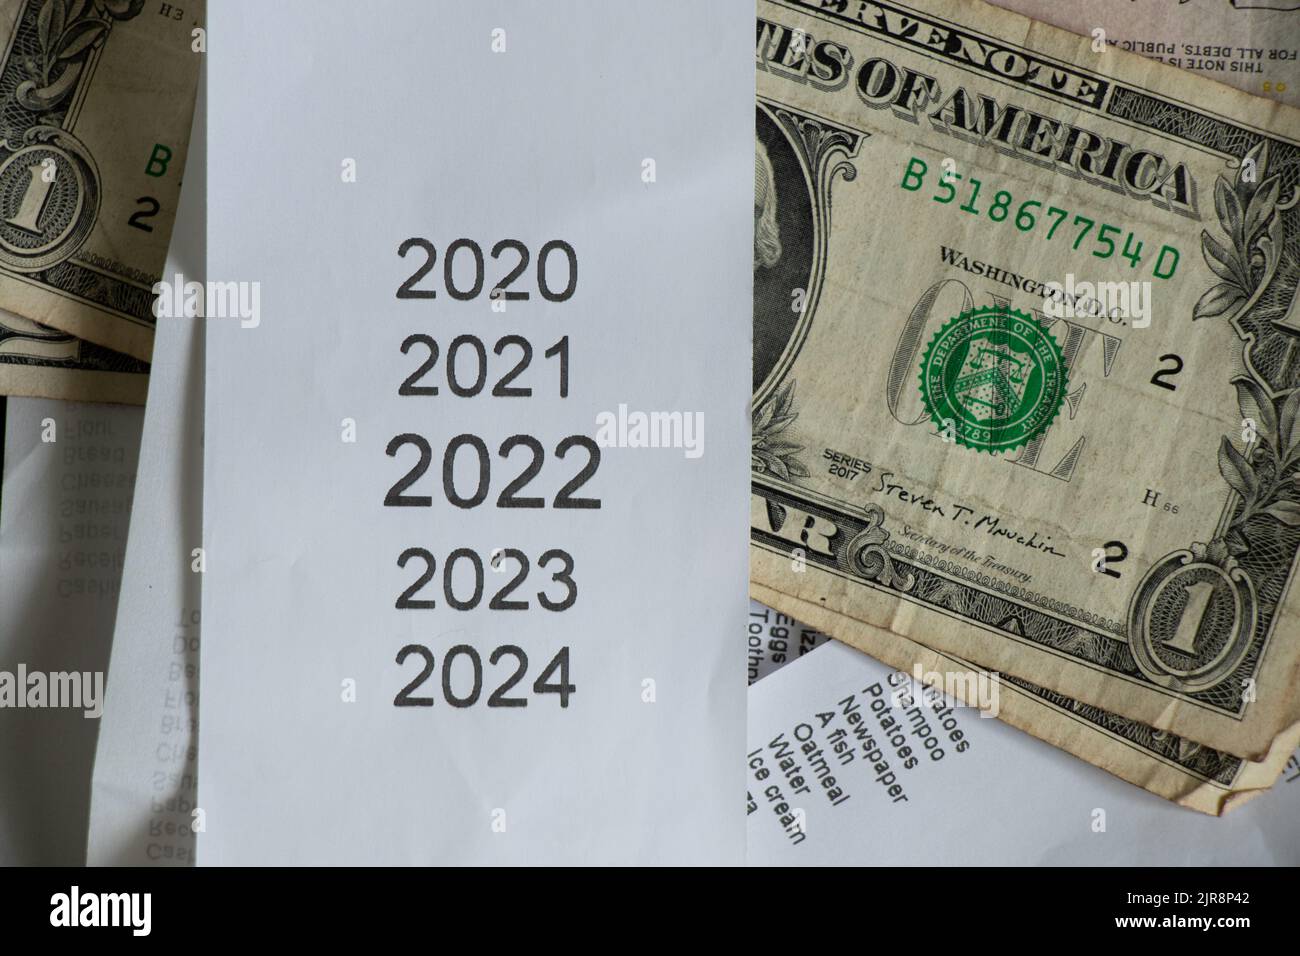 list of years 2020 2021 2022 2023 on the cash register that lies near the American dollars, sales receipt and money, financial topic, revenues in 2022 Stock Photo